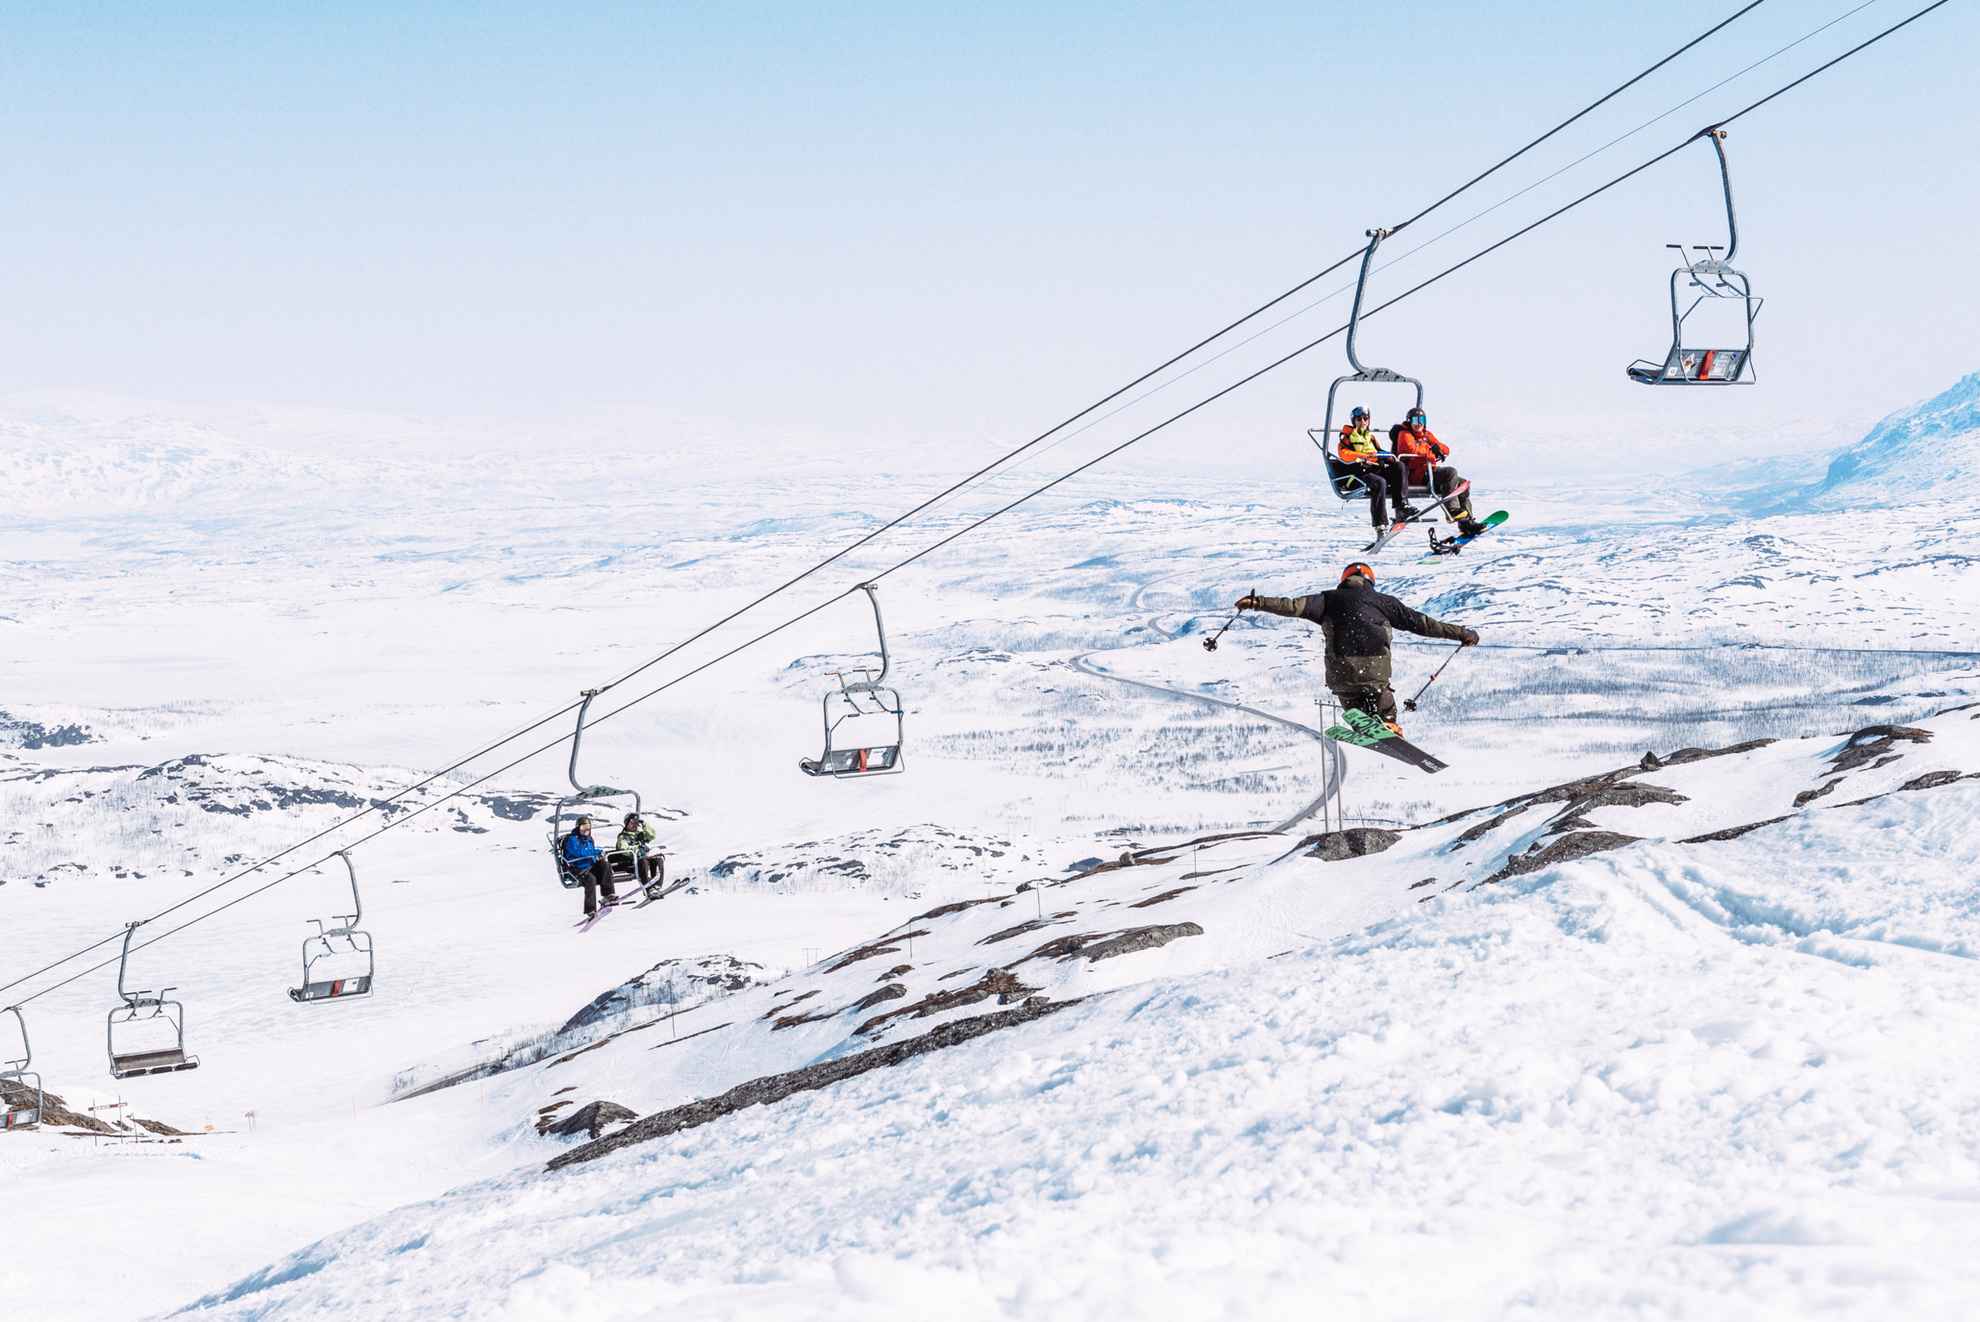 People sitting on a ski lift looking at a person jumping with skis.